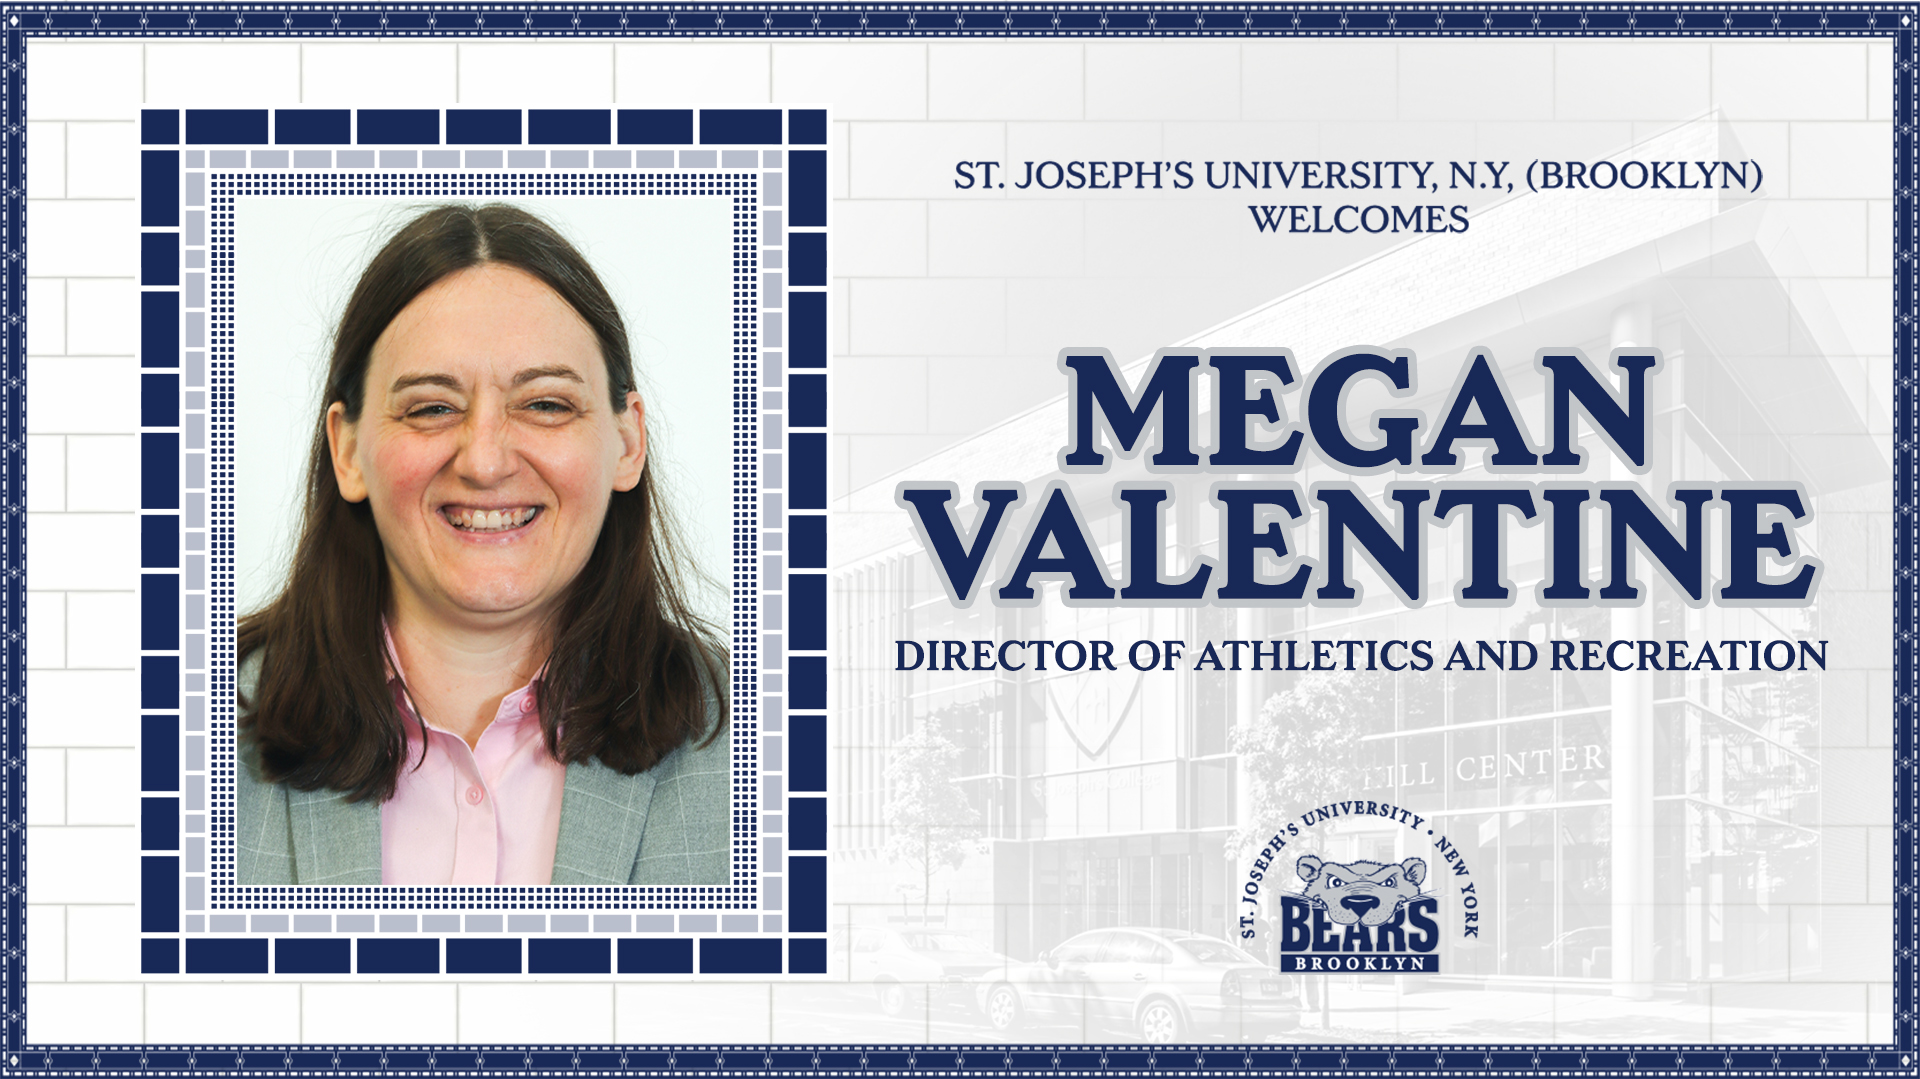 Megan Valentine Appointed St. Joseph’s (Brooklyn) Director of Athletics and Recreation